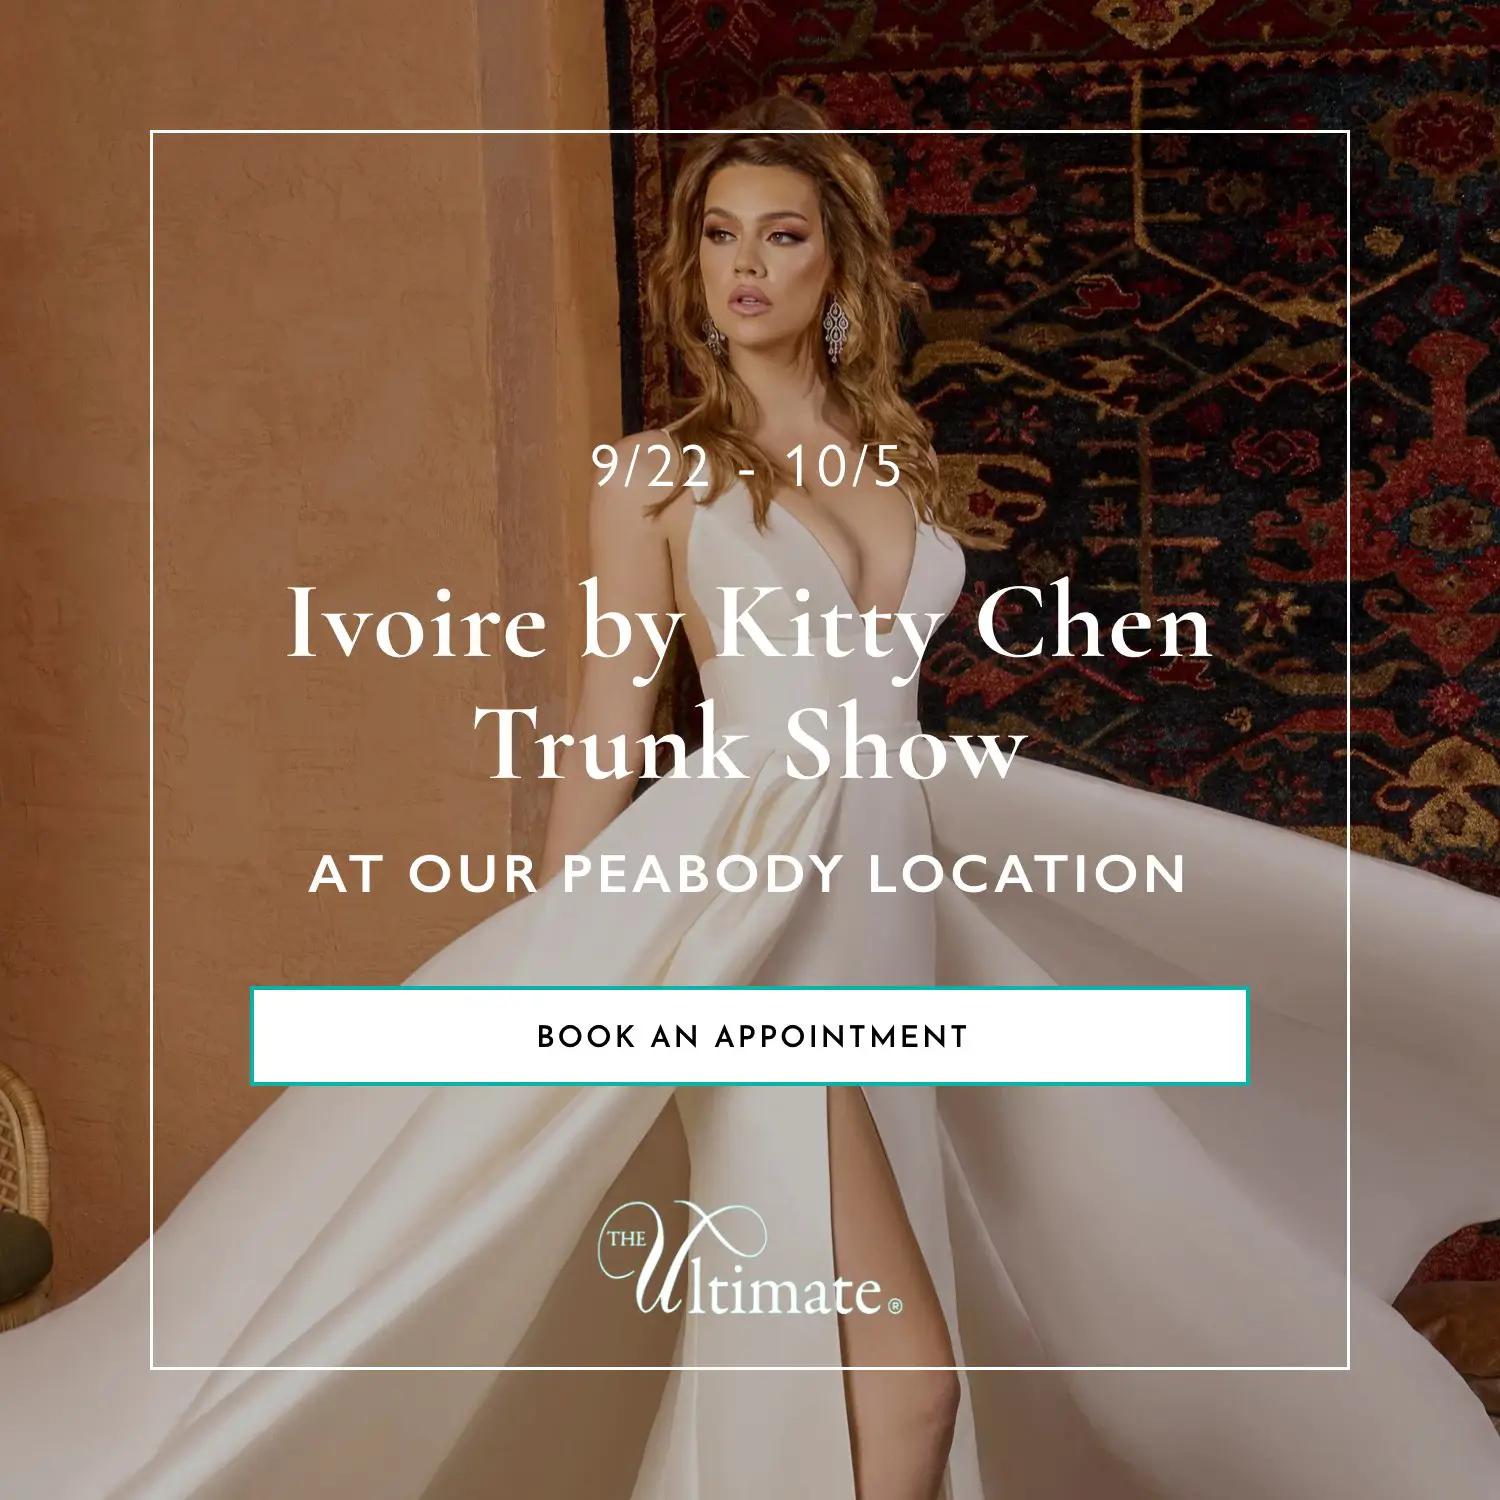 Ivoire by Kitty Chen trunk show at The Ultimate Peabody location